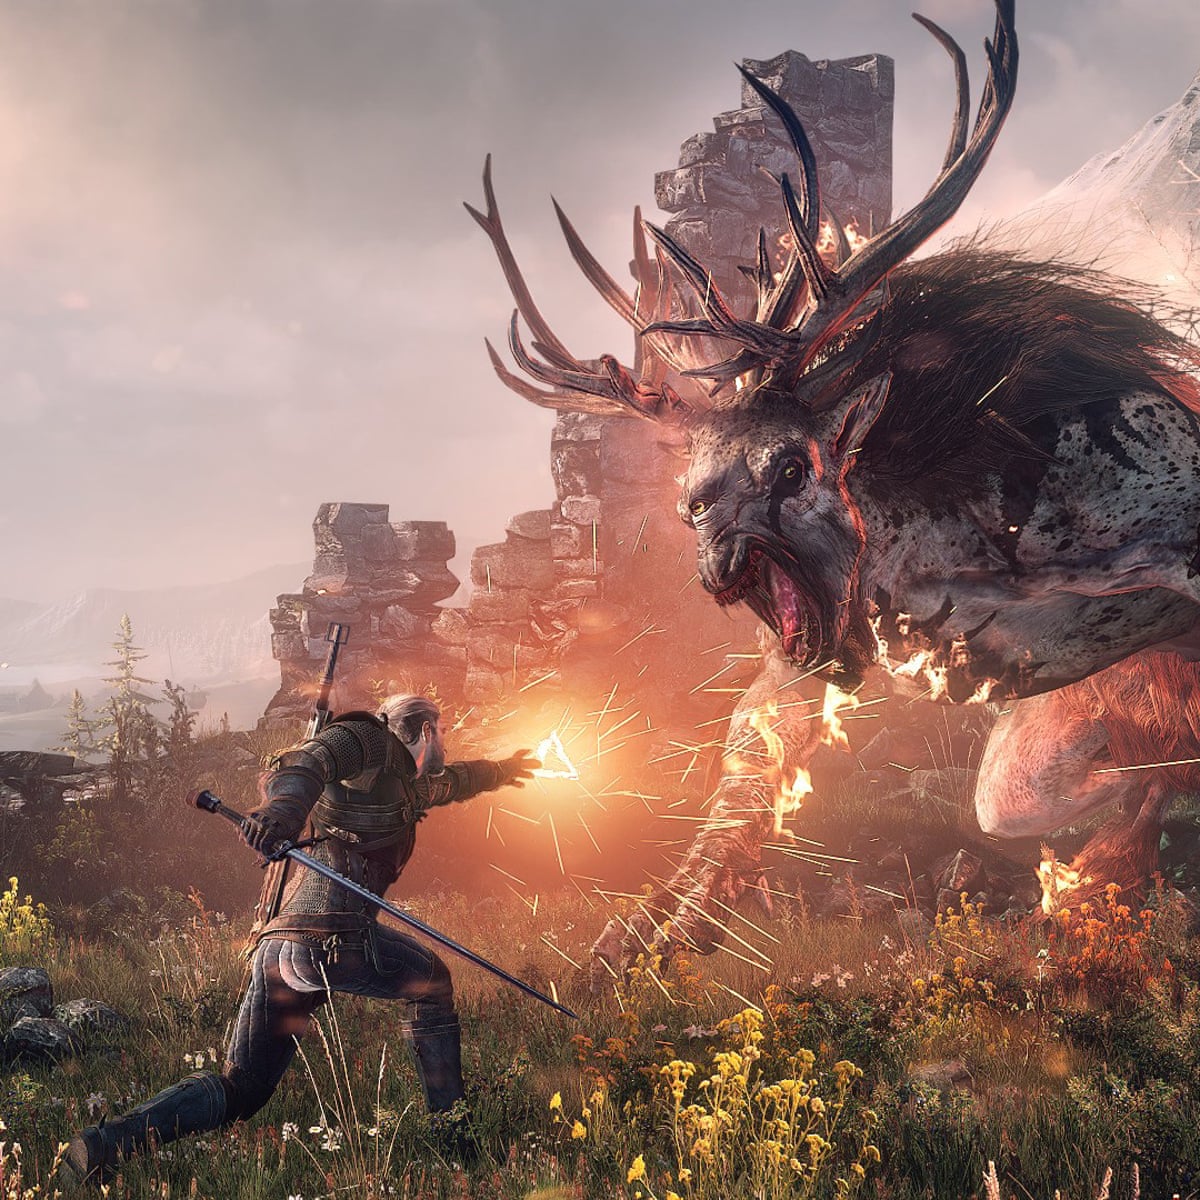 Witcher 3 Former Devs Working on Online Action Game - Fextralife